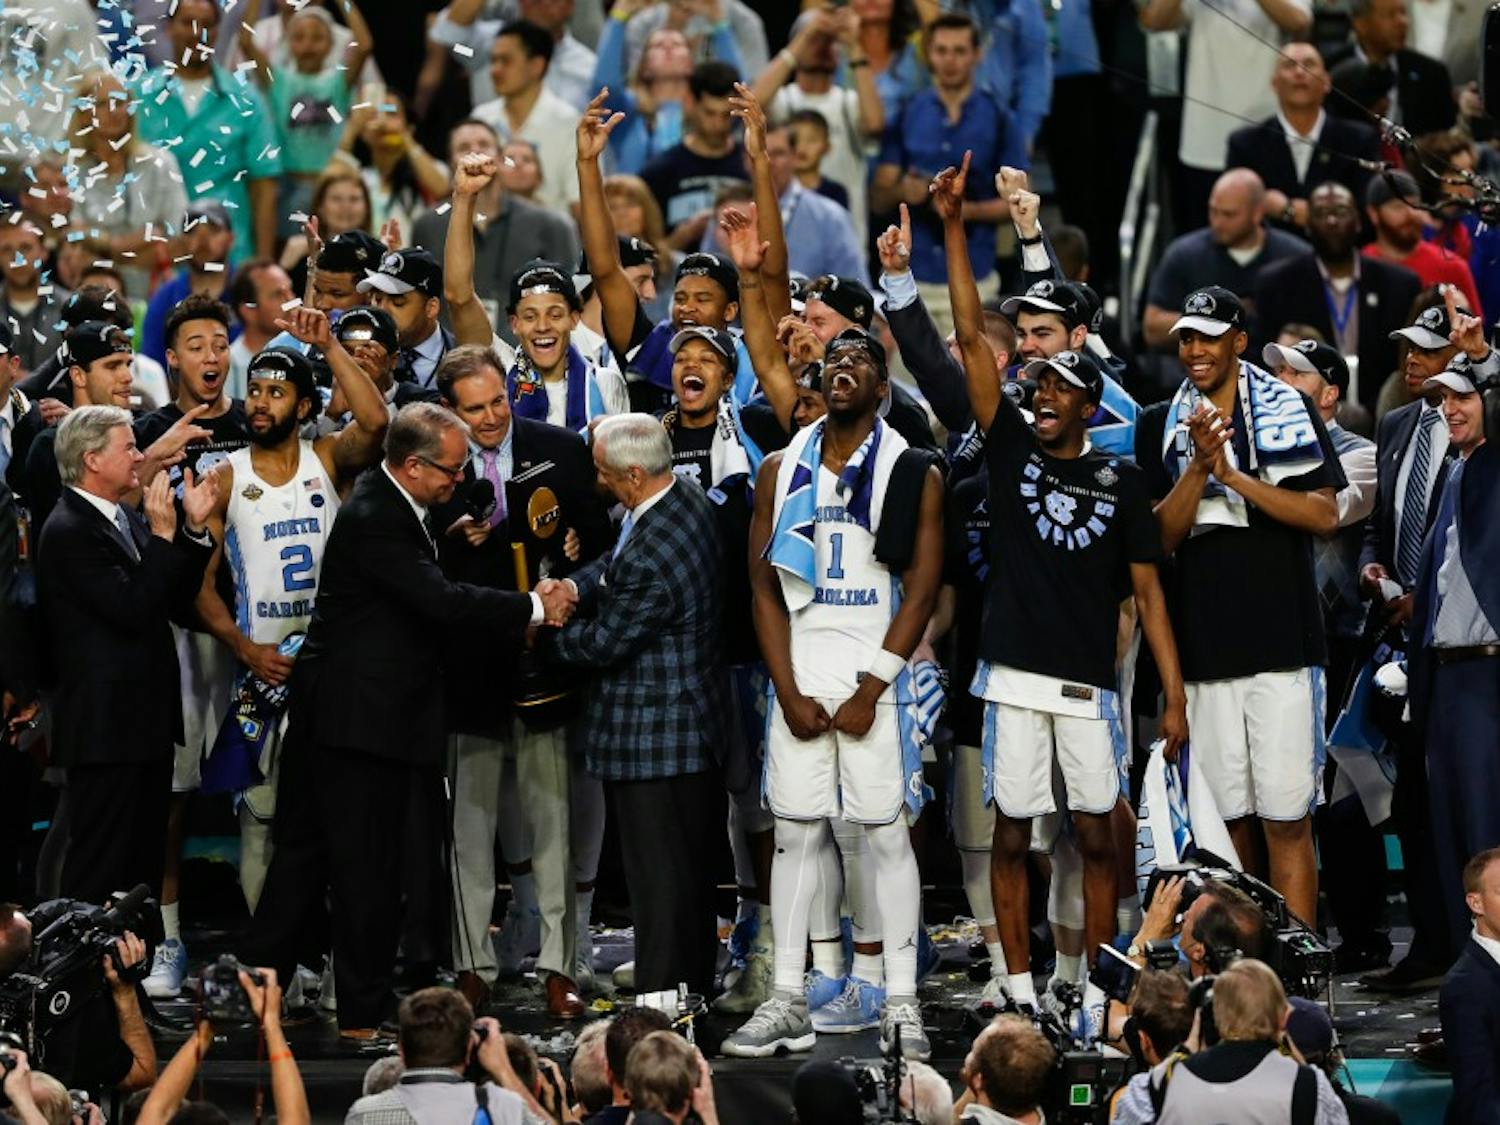 The North Carolina mens basketball team recieves the NCAA Final trophy after their win over Gonzaga in Phoenix on Monday.